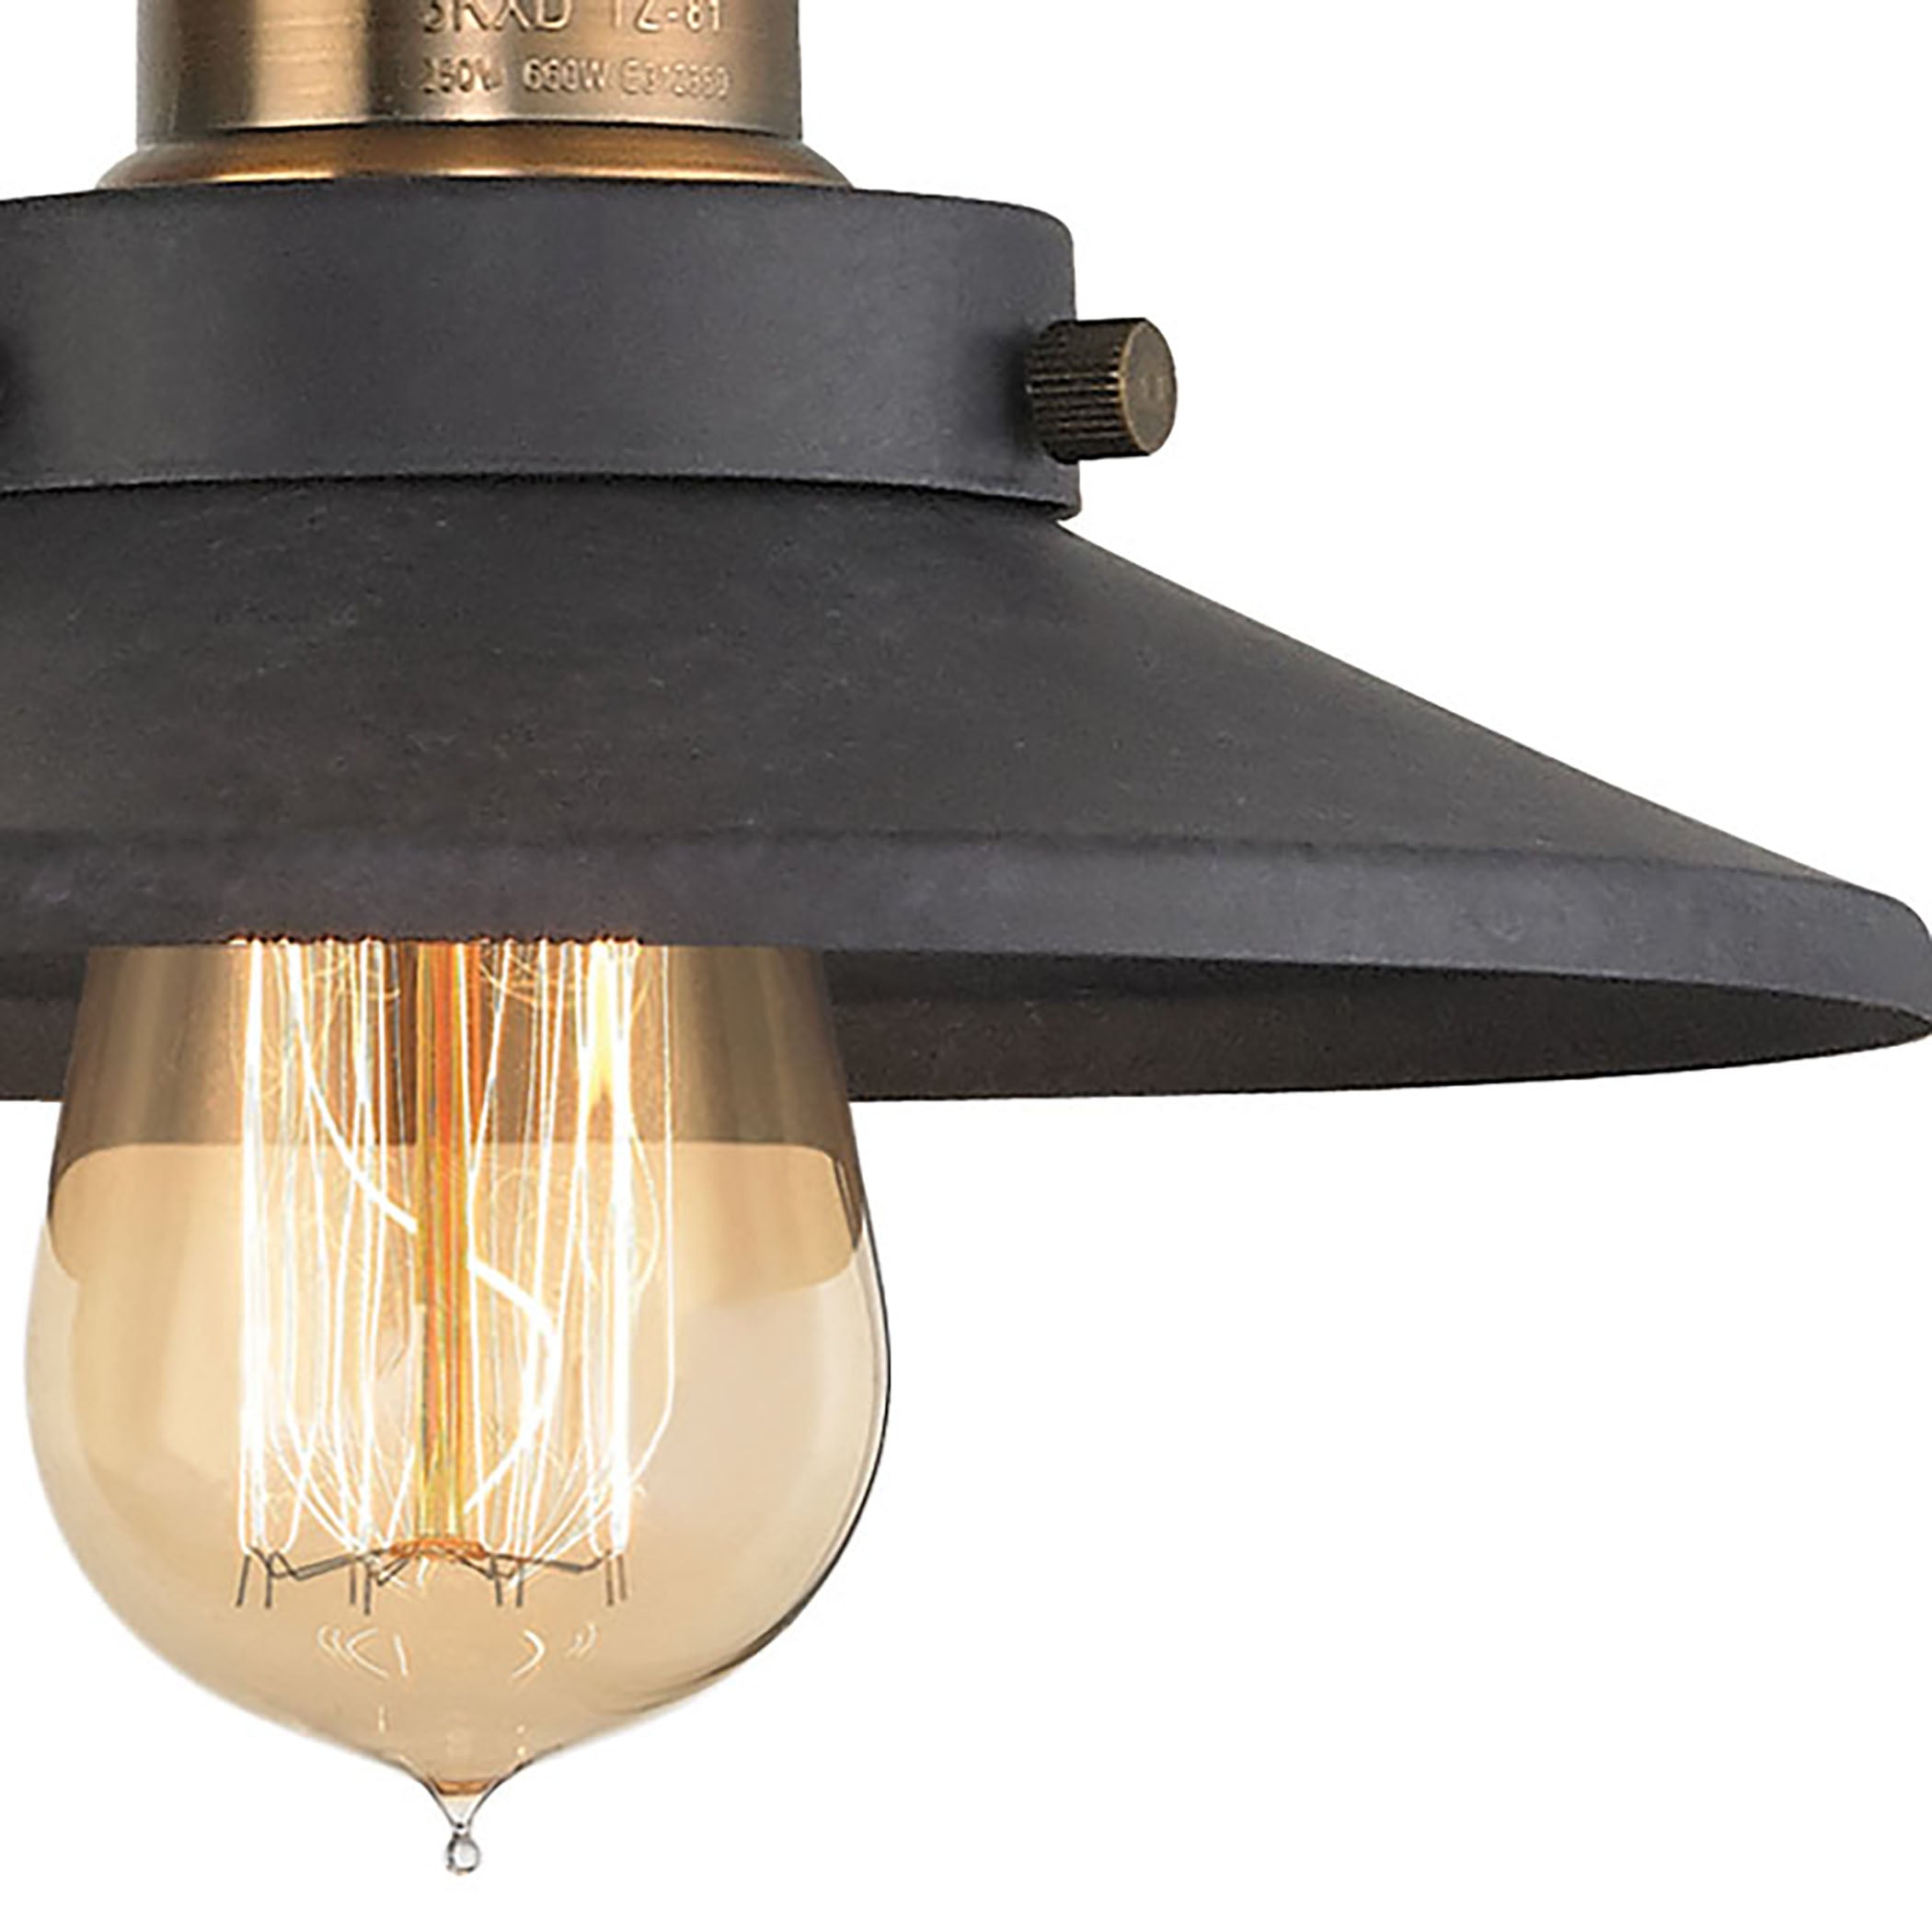 ELK Lighting 67182/3 English Pub 3-Light Vanity Lamp in Antique Brass and Tarnished Graphite with Metal Shade